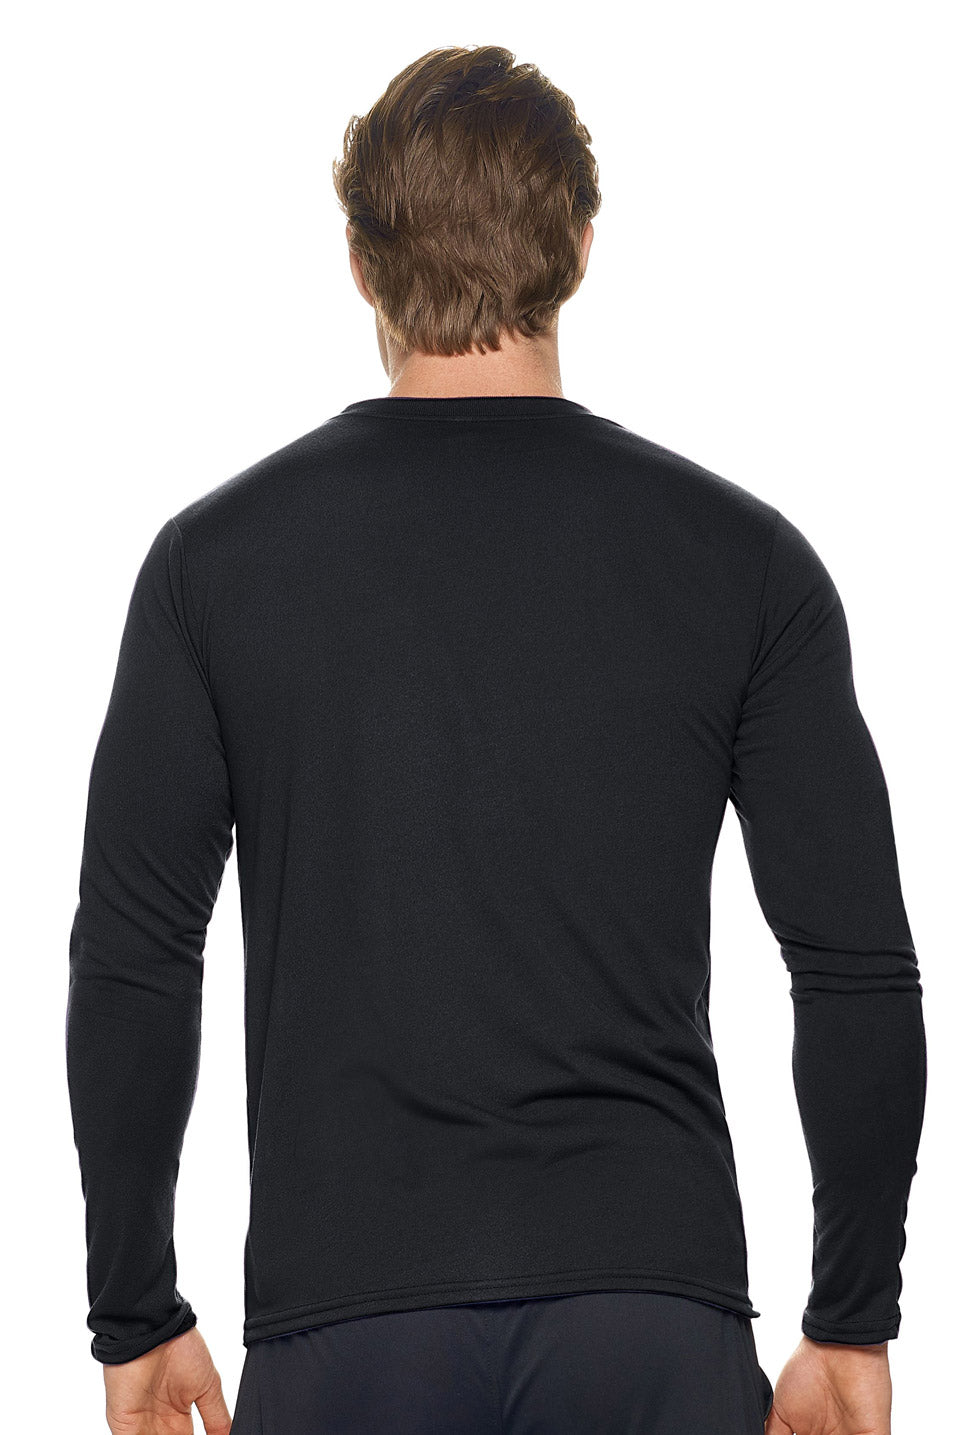 Expert Apparel Unisex Men's Long Sleeve in the Field Work Shirt Made in the USA in black image 3#color_black